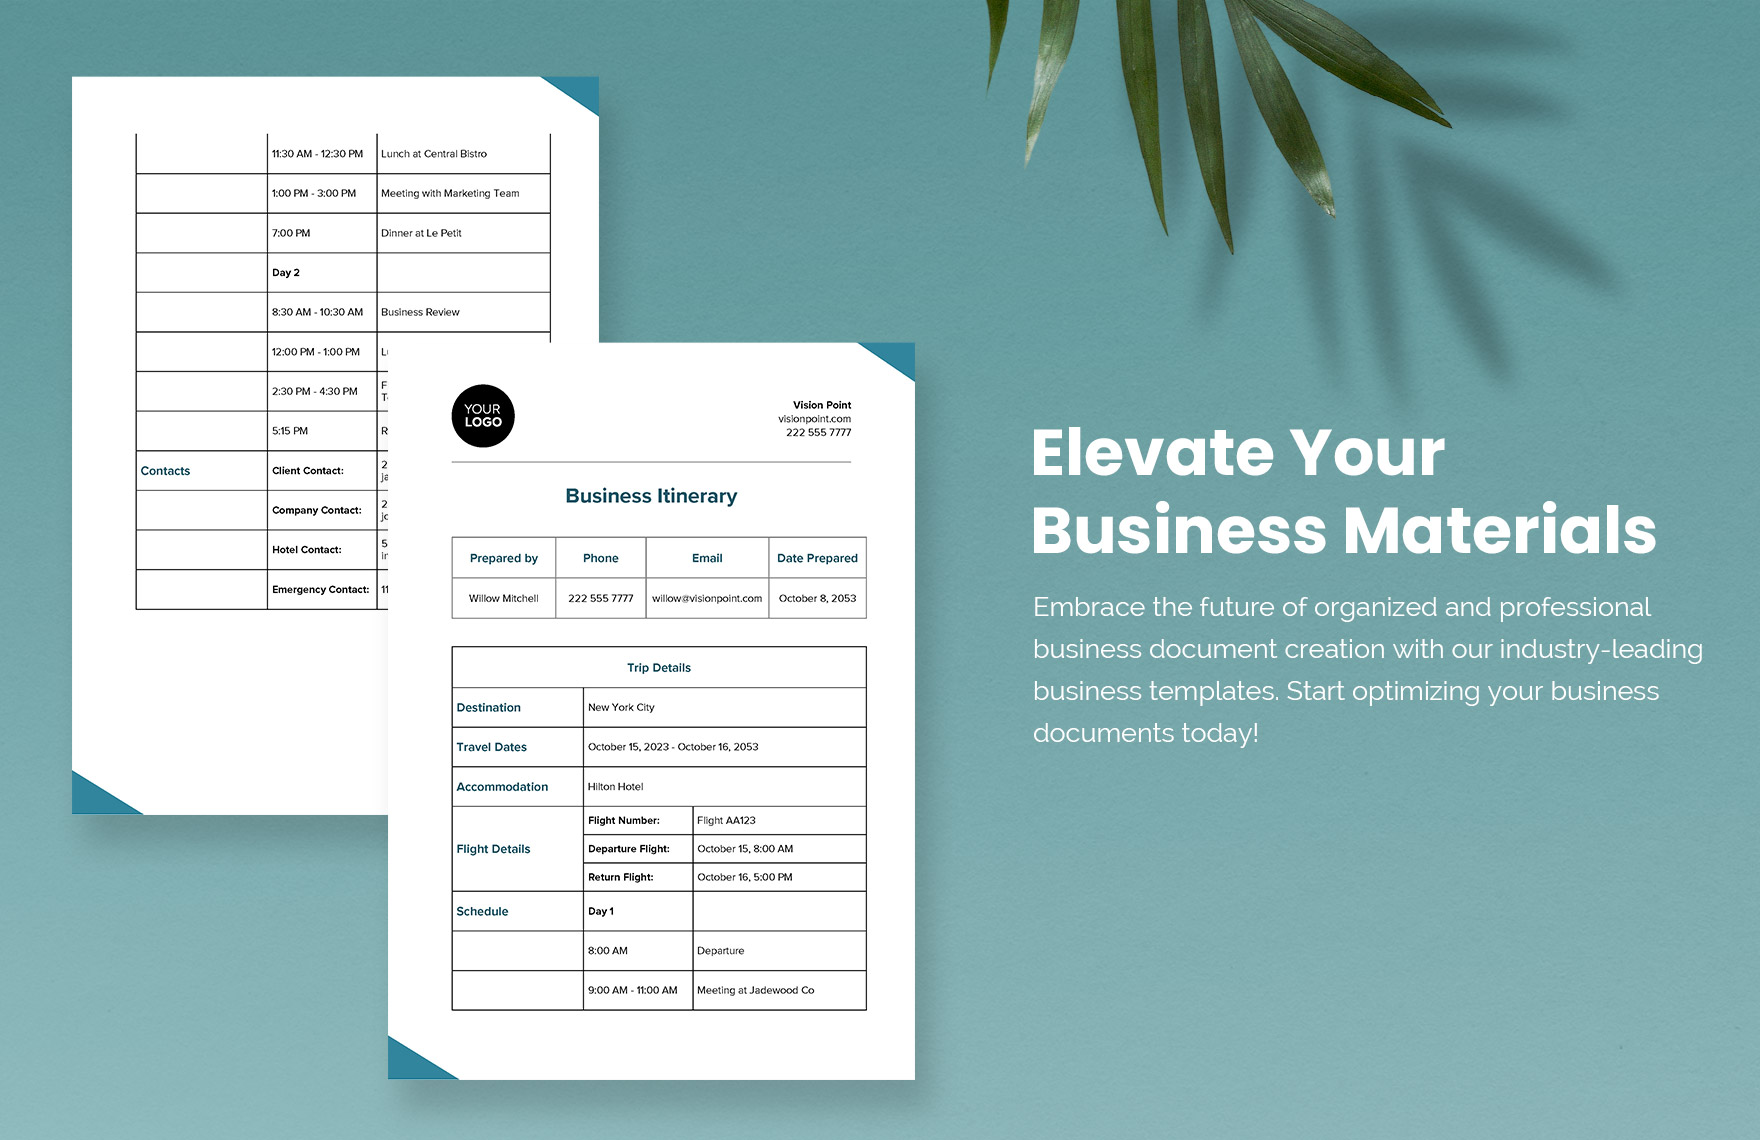 Business Itinerary Template